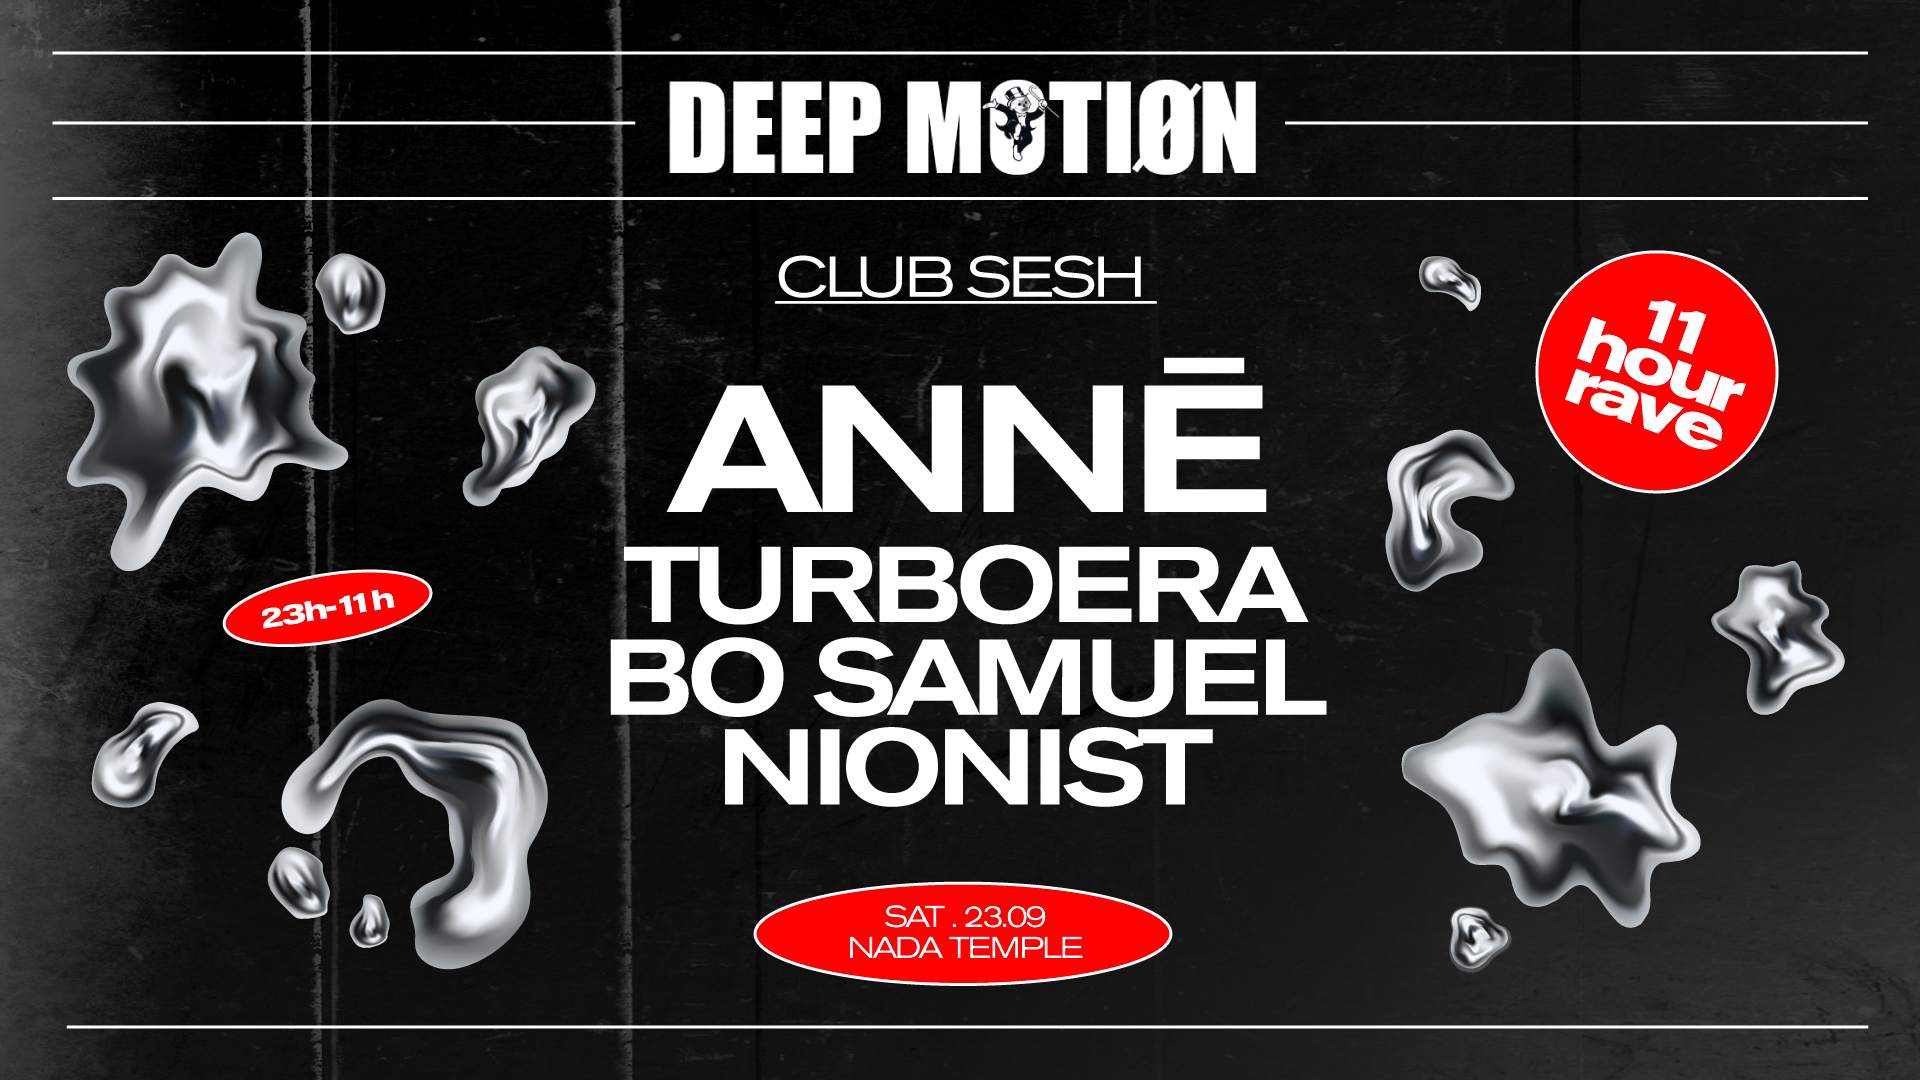 CLUB SESH with ANNĒ - フライヤー表